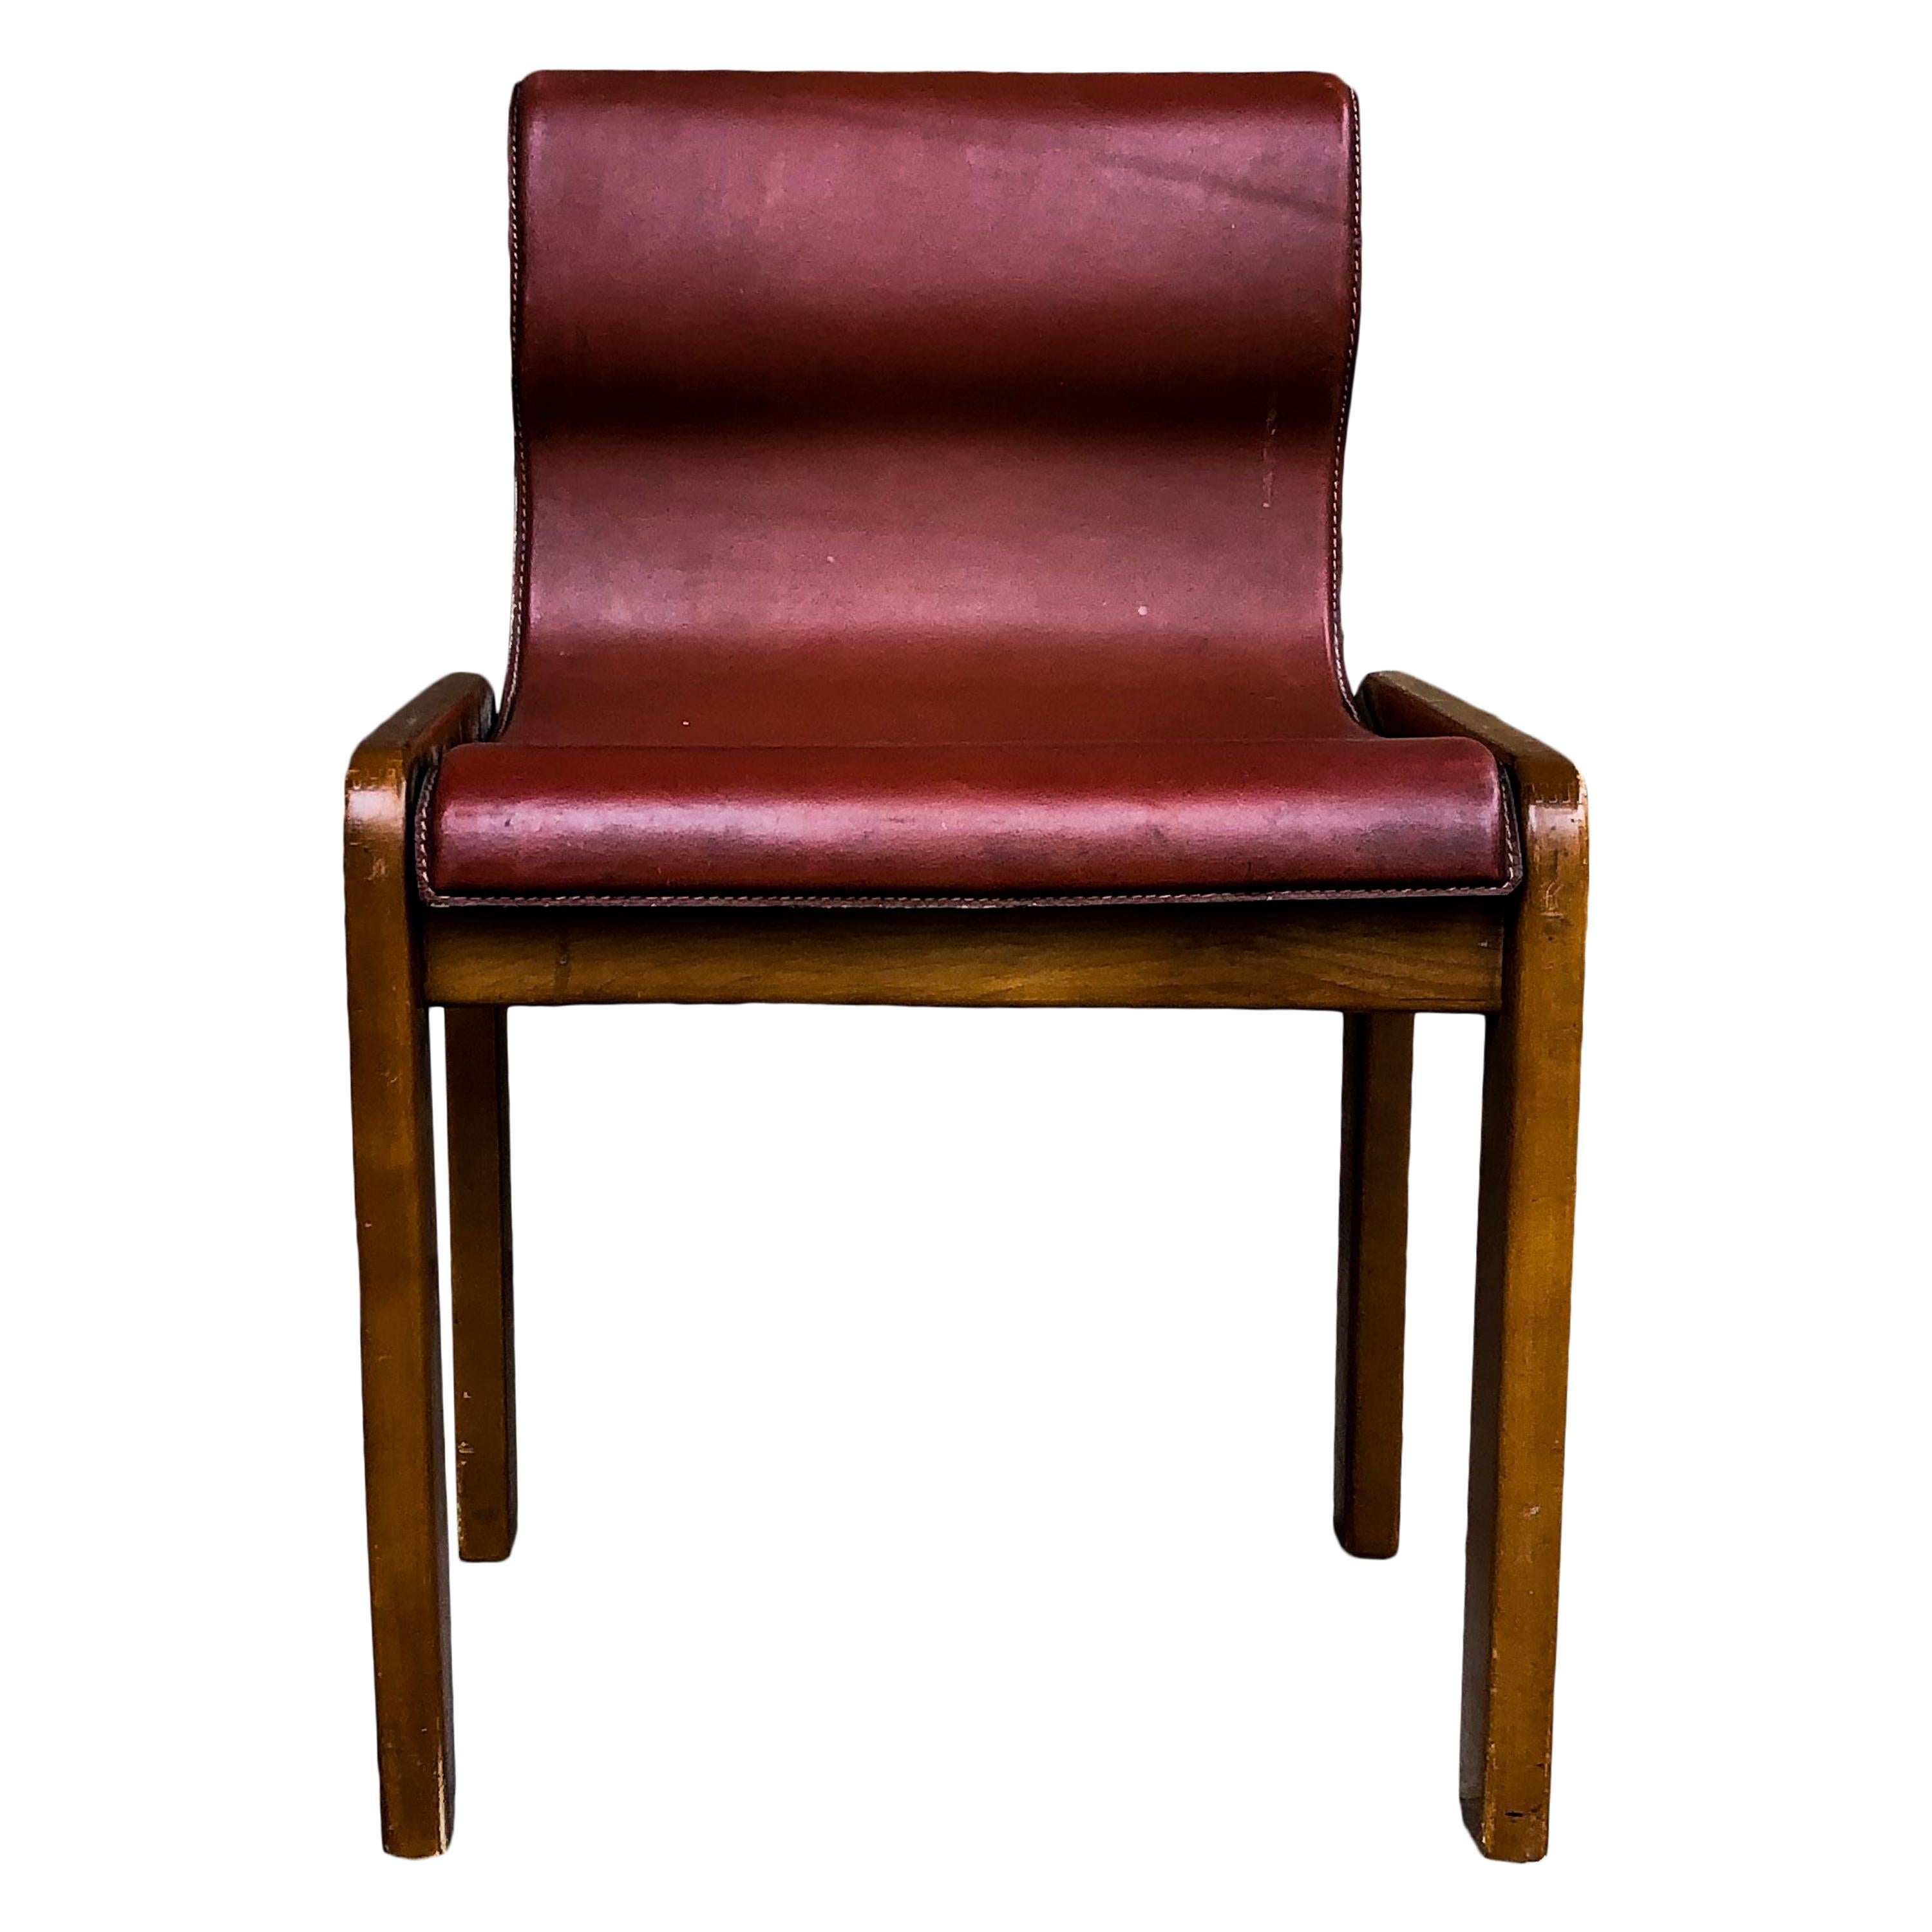 Afra & Tobia Scarpa Midcentury Leather and Plywood Dining Chair, 1966, Set of 4 For Sale 7